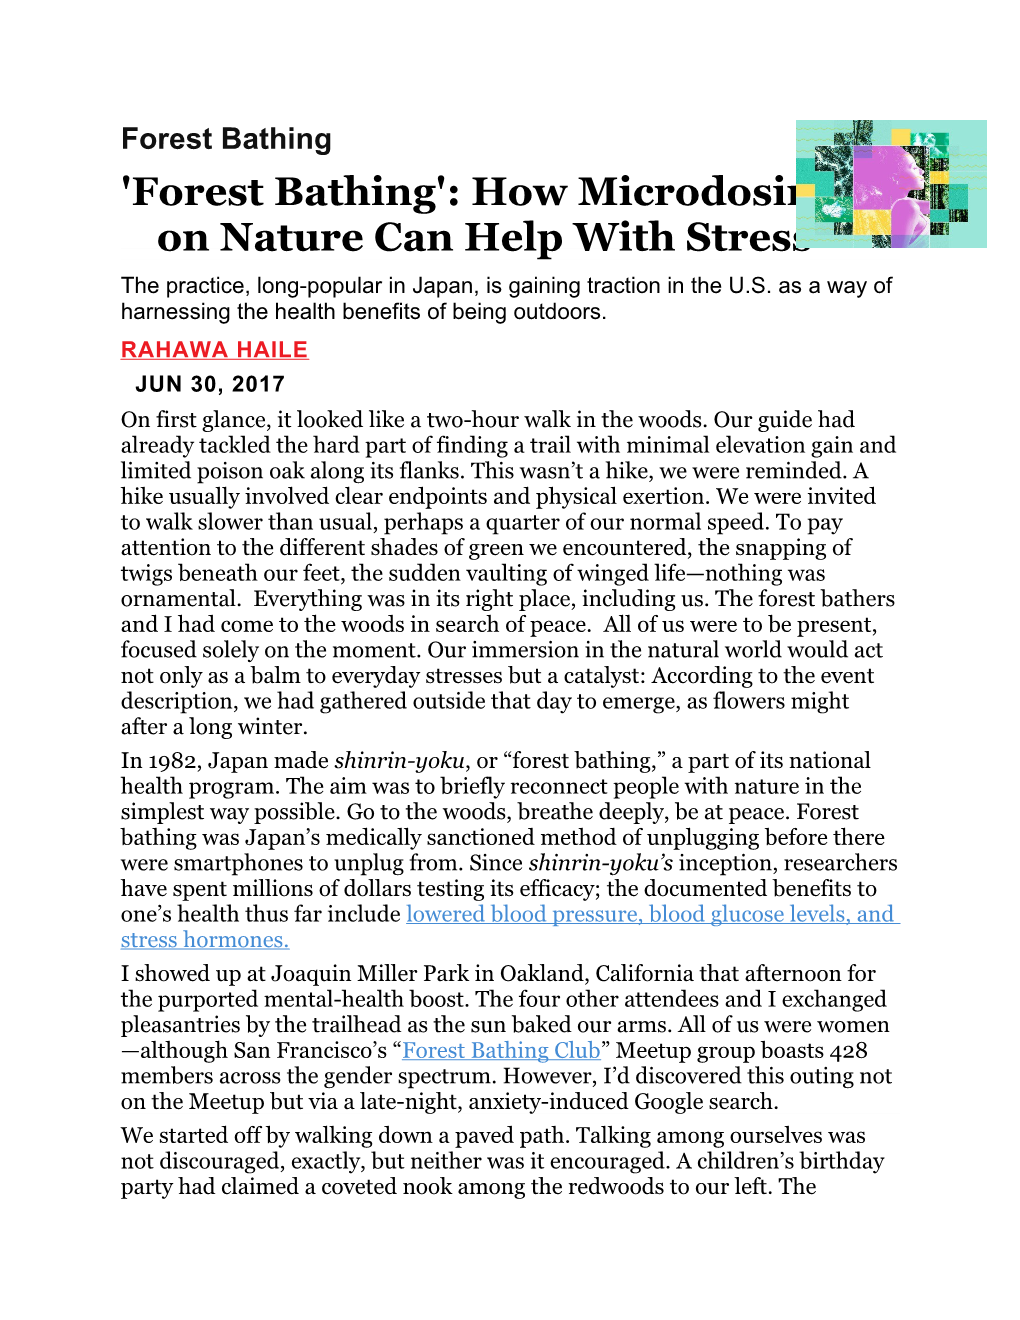 'Forest Bathing': How Microdosing on Nature Can Help with Stress